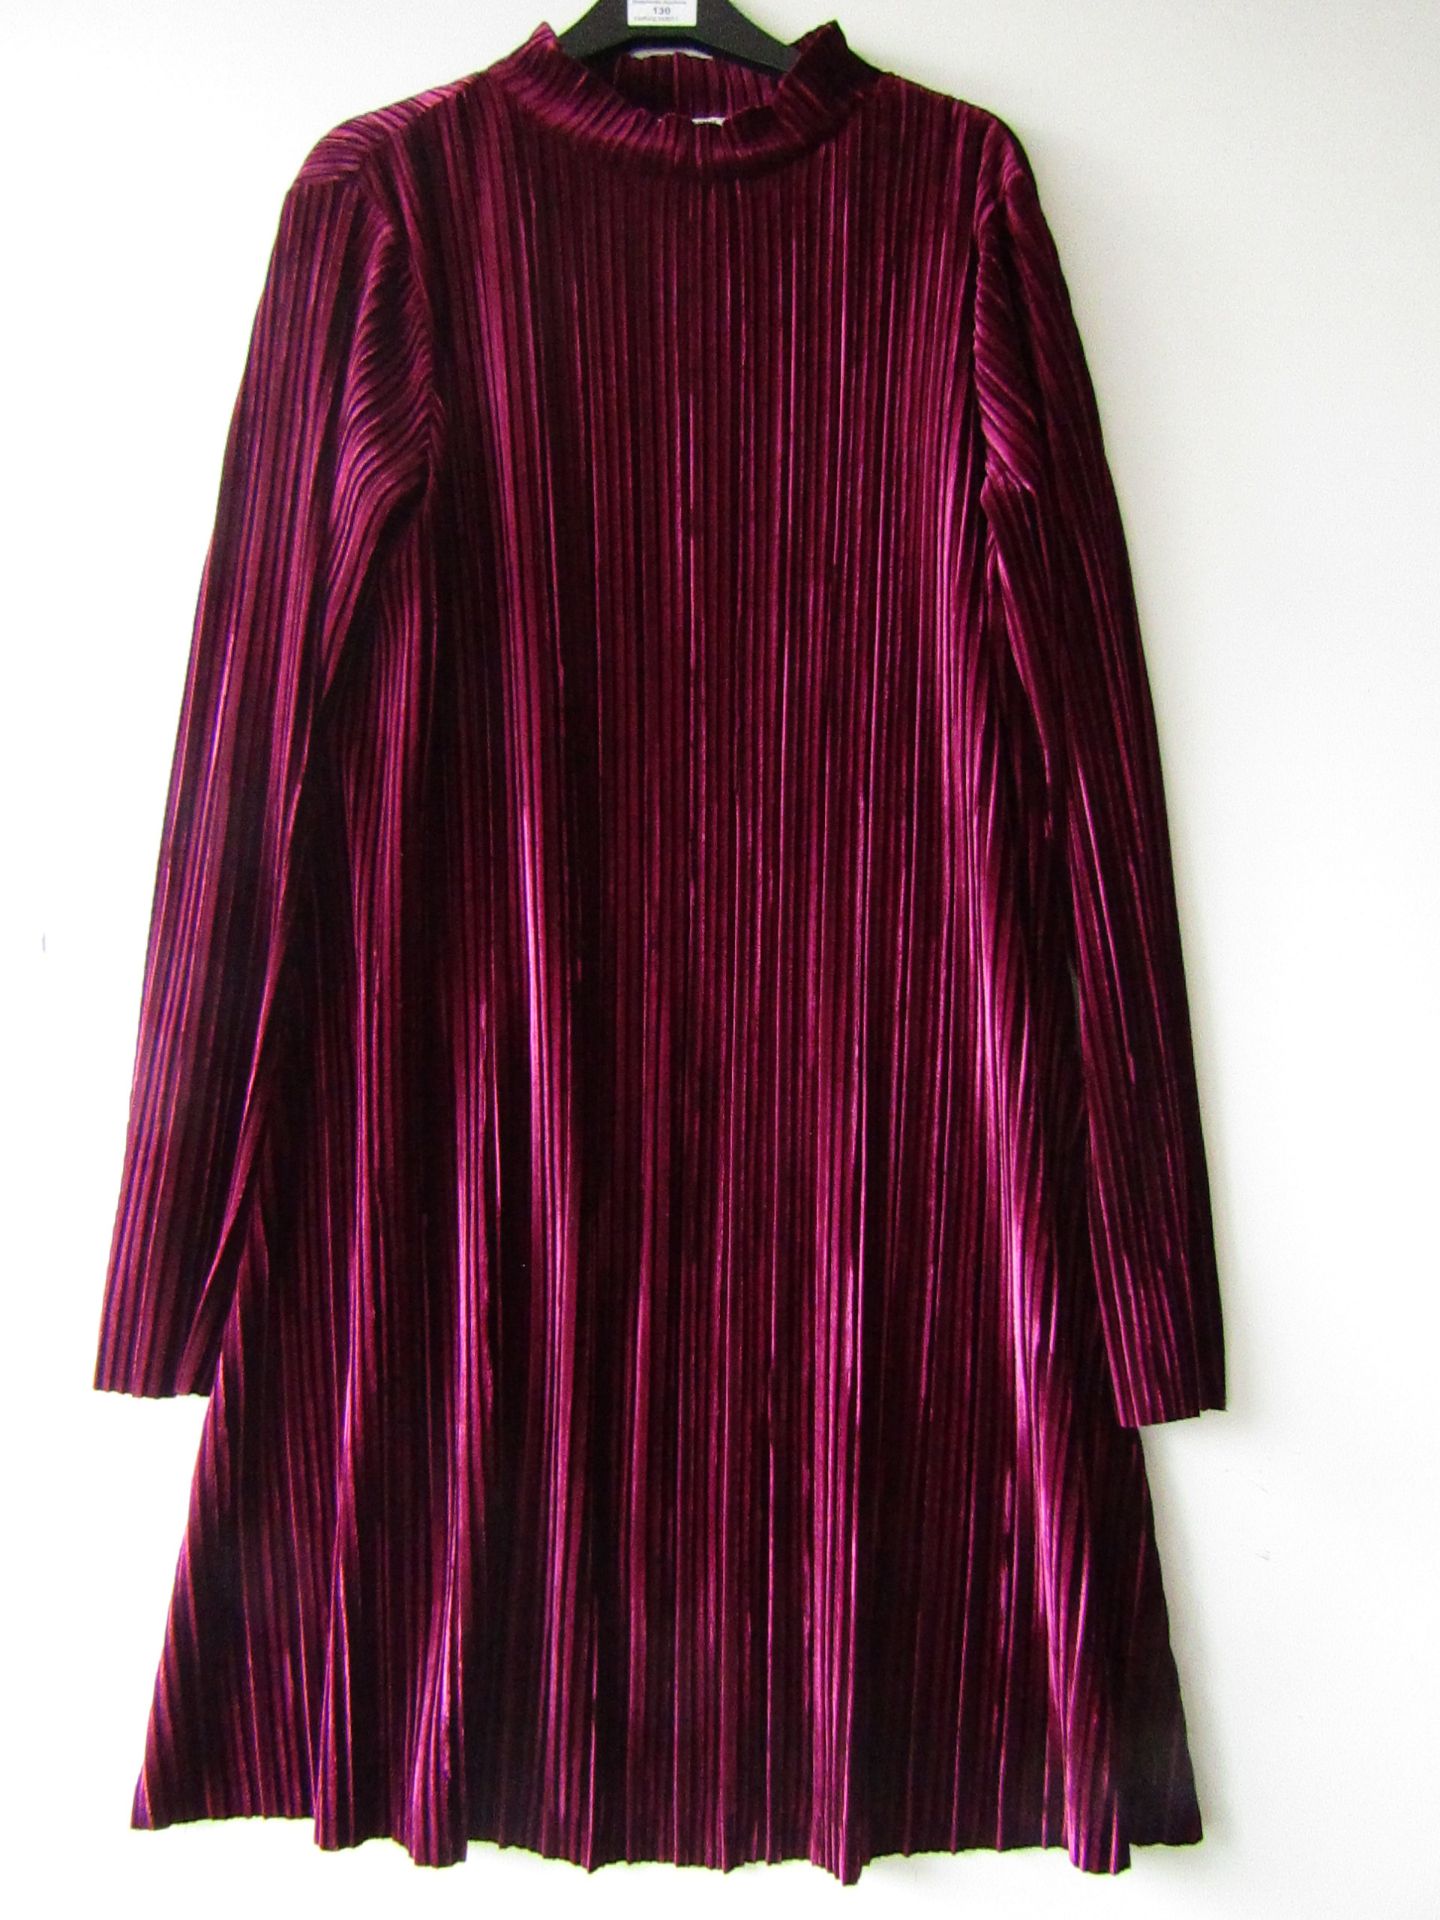 Ladies Brave Soul Long Velvet sleeved Dress. New Sample with tags. Size S